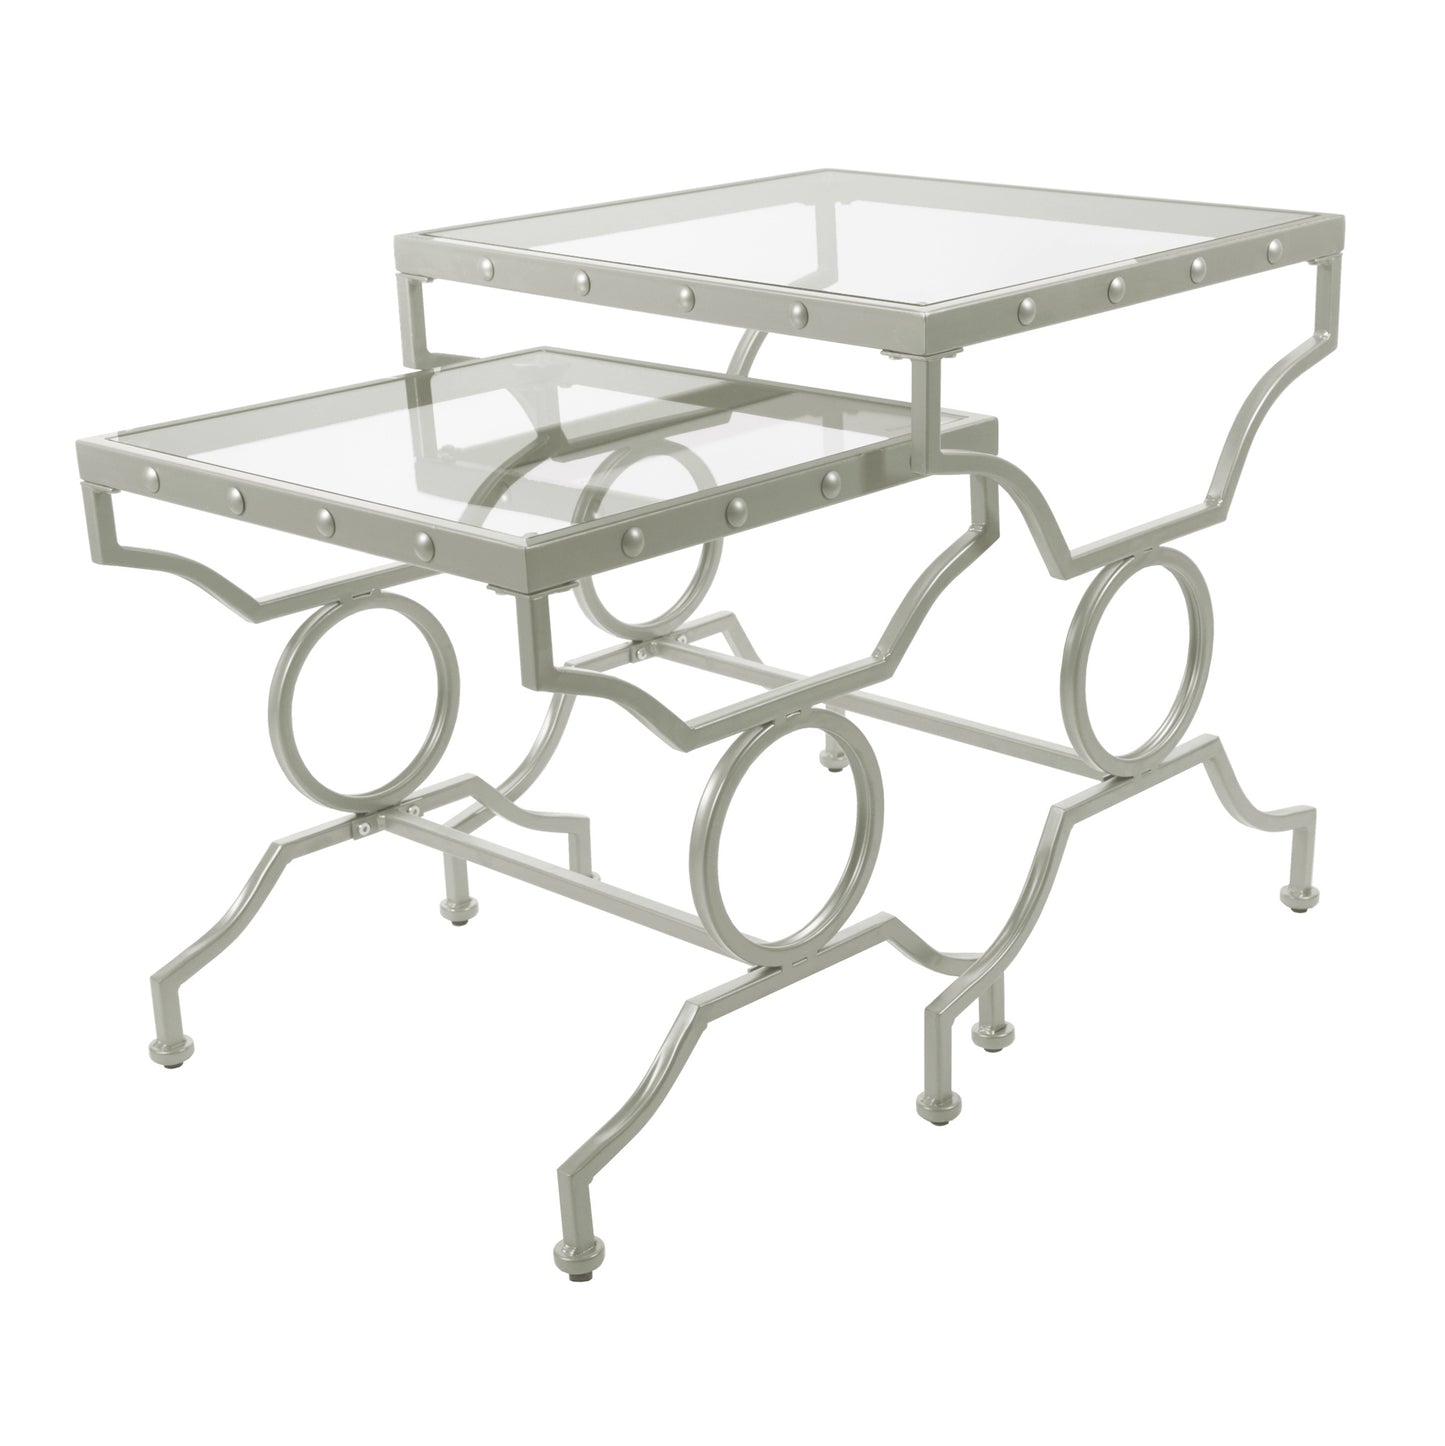 38.5" x 43.5" x 43" Silver Tempered Glass 2pcs Nesting Table Set